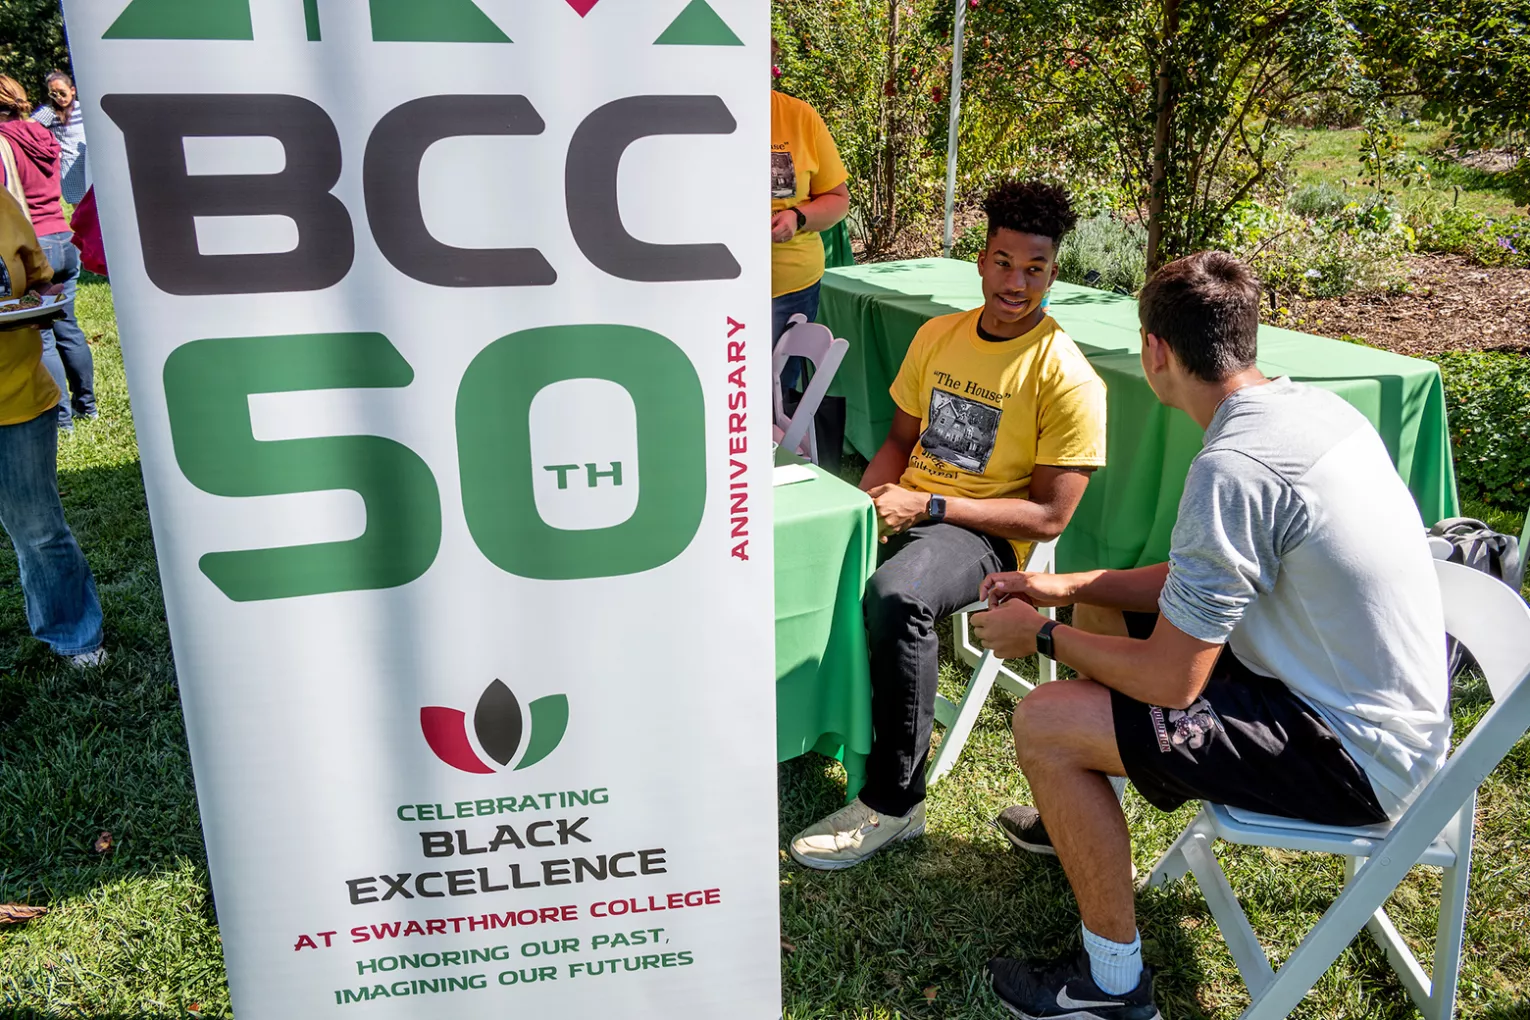 Student sits near sign that reads "BCC 50th Anniversary"